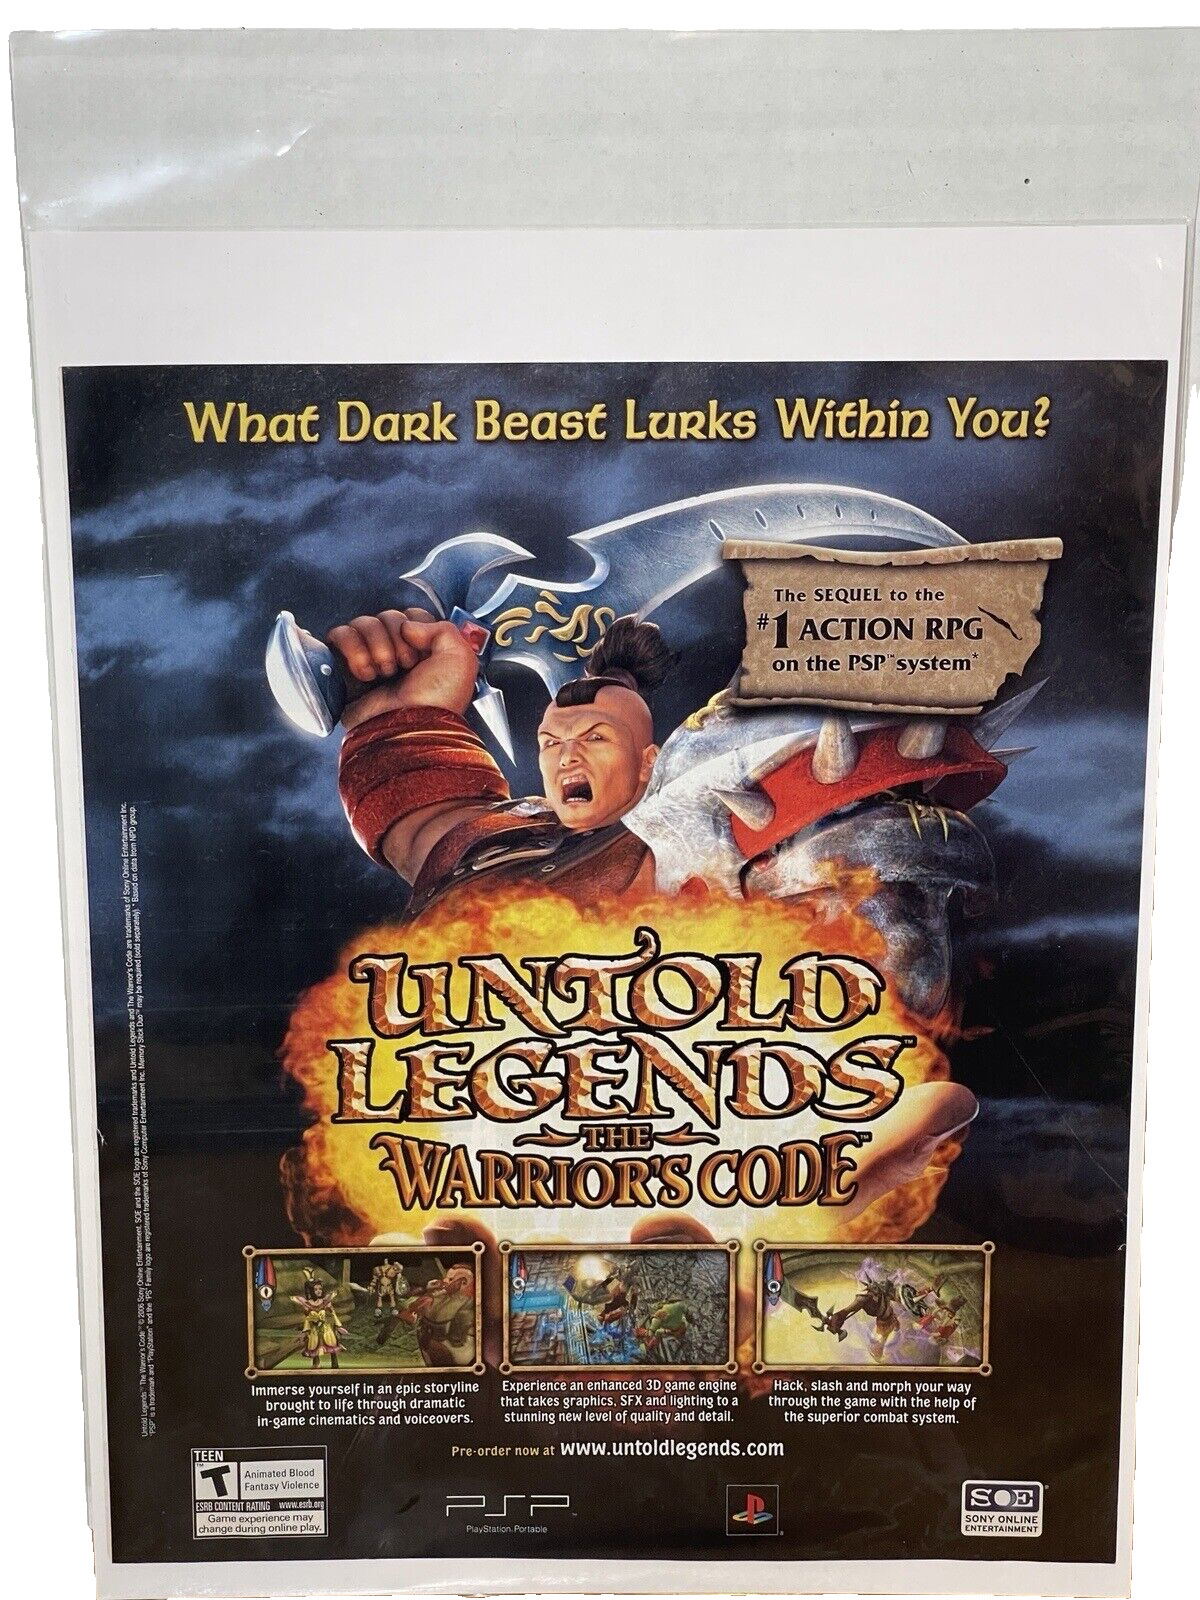 Untold Legends the Warrior's Code - Game Print Ad / Poster Promo Art 2006